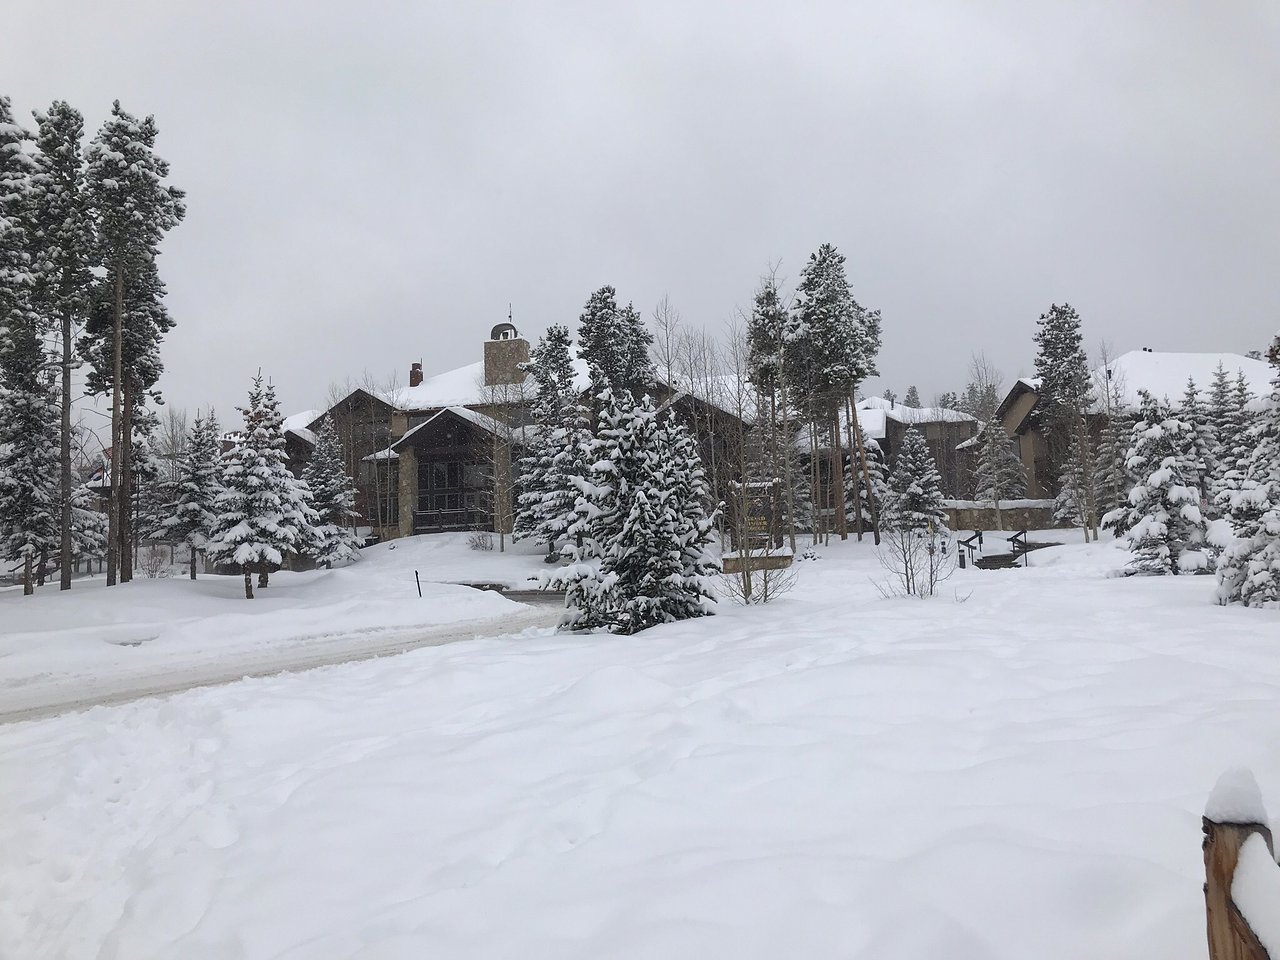 Grand Timber Lodge is one of the great ski resorts